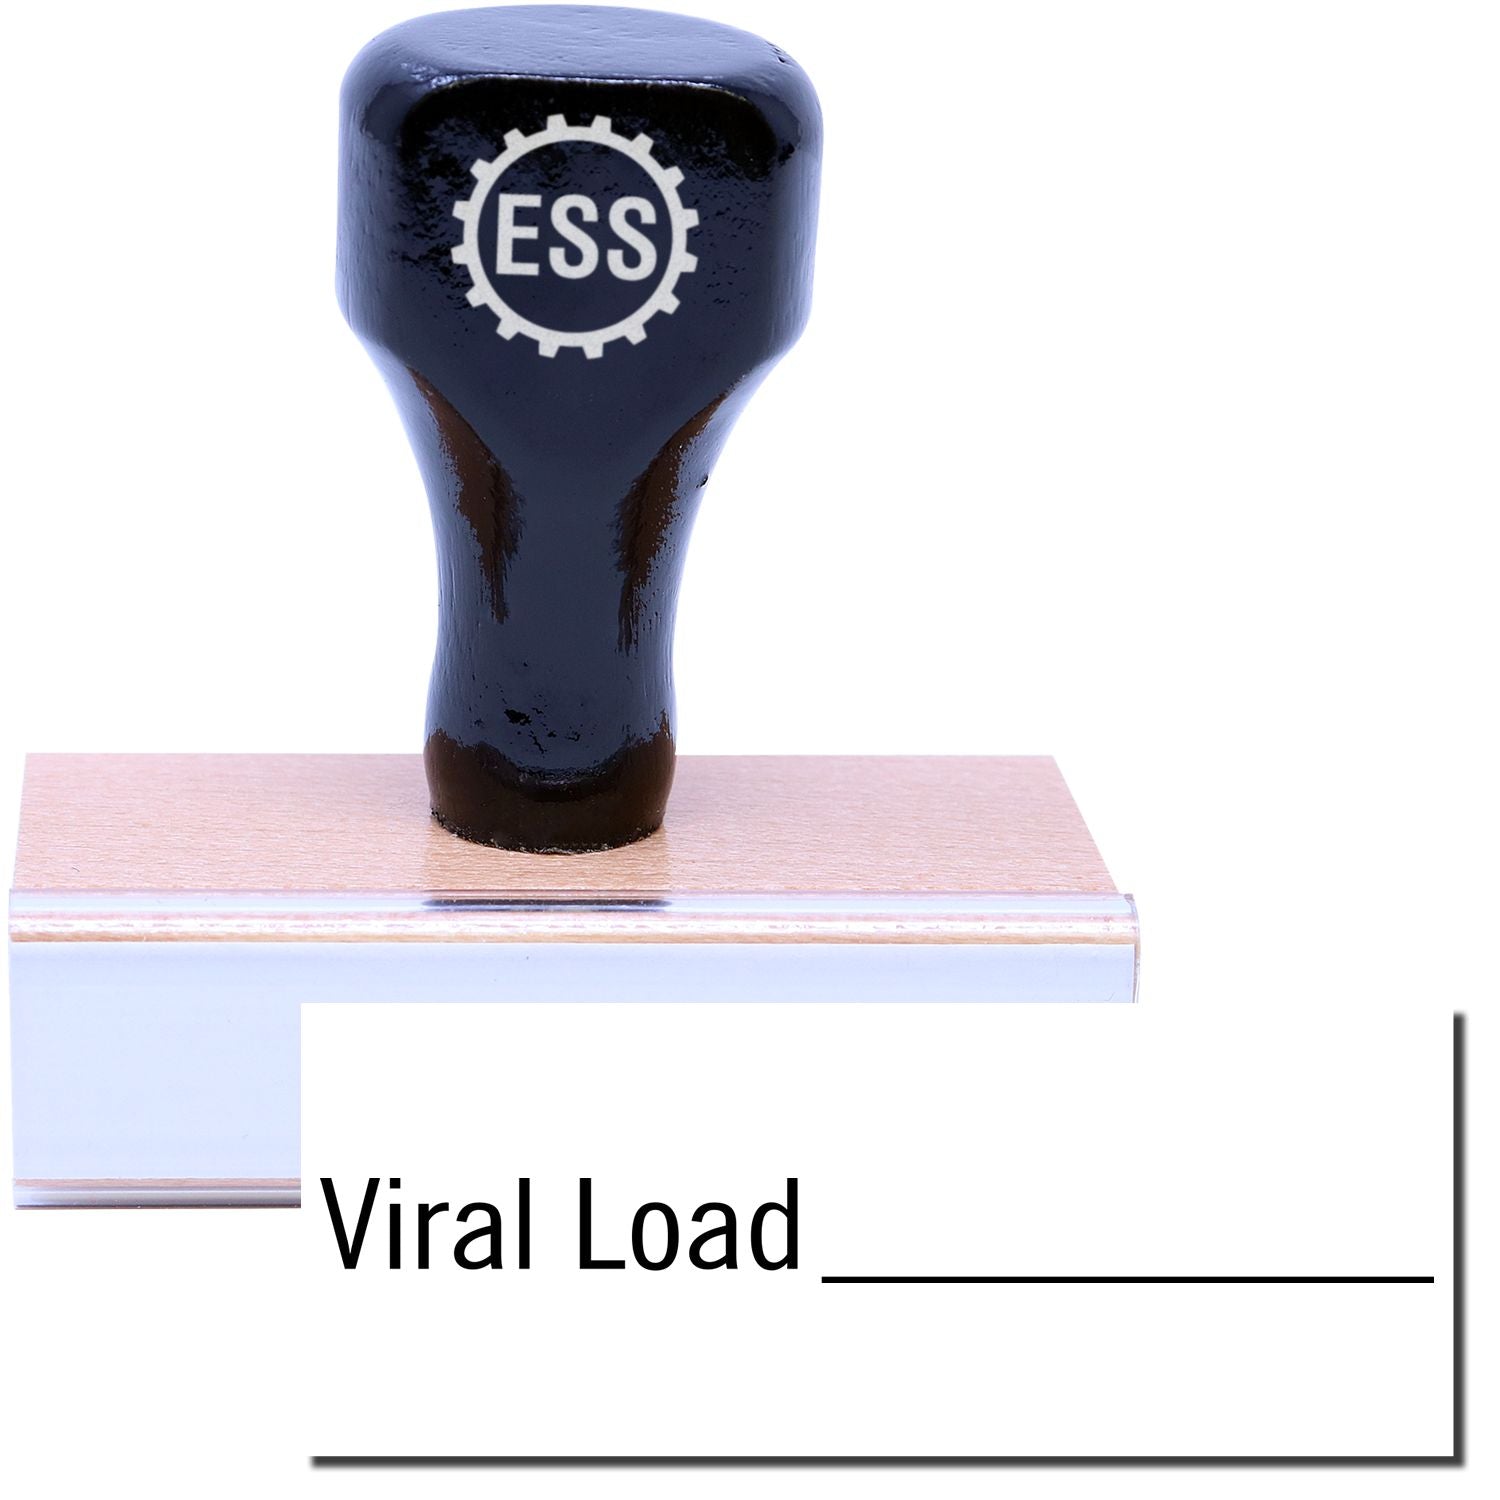 A stock office rubber stamp with a stamped image showing how the text "Viral Load" in a large font with a line is displayed after stamping.